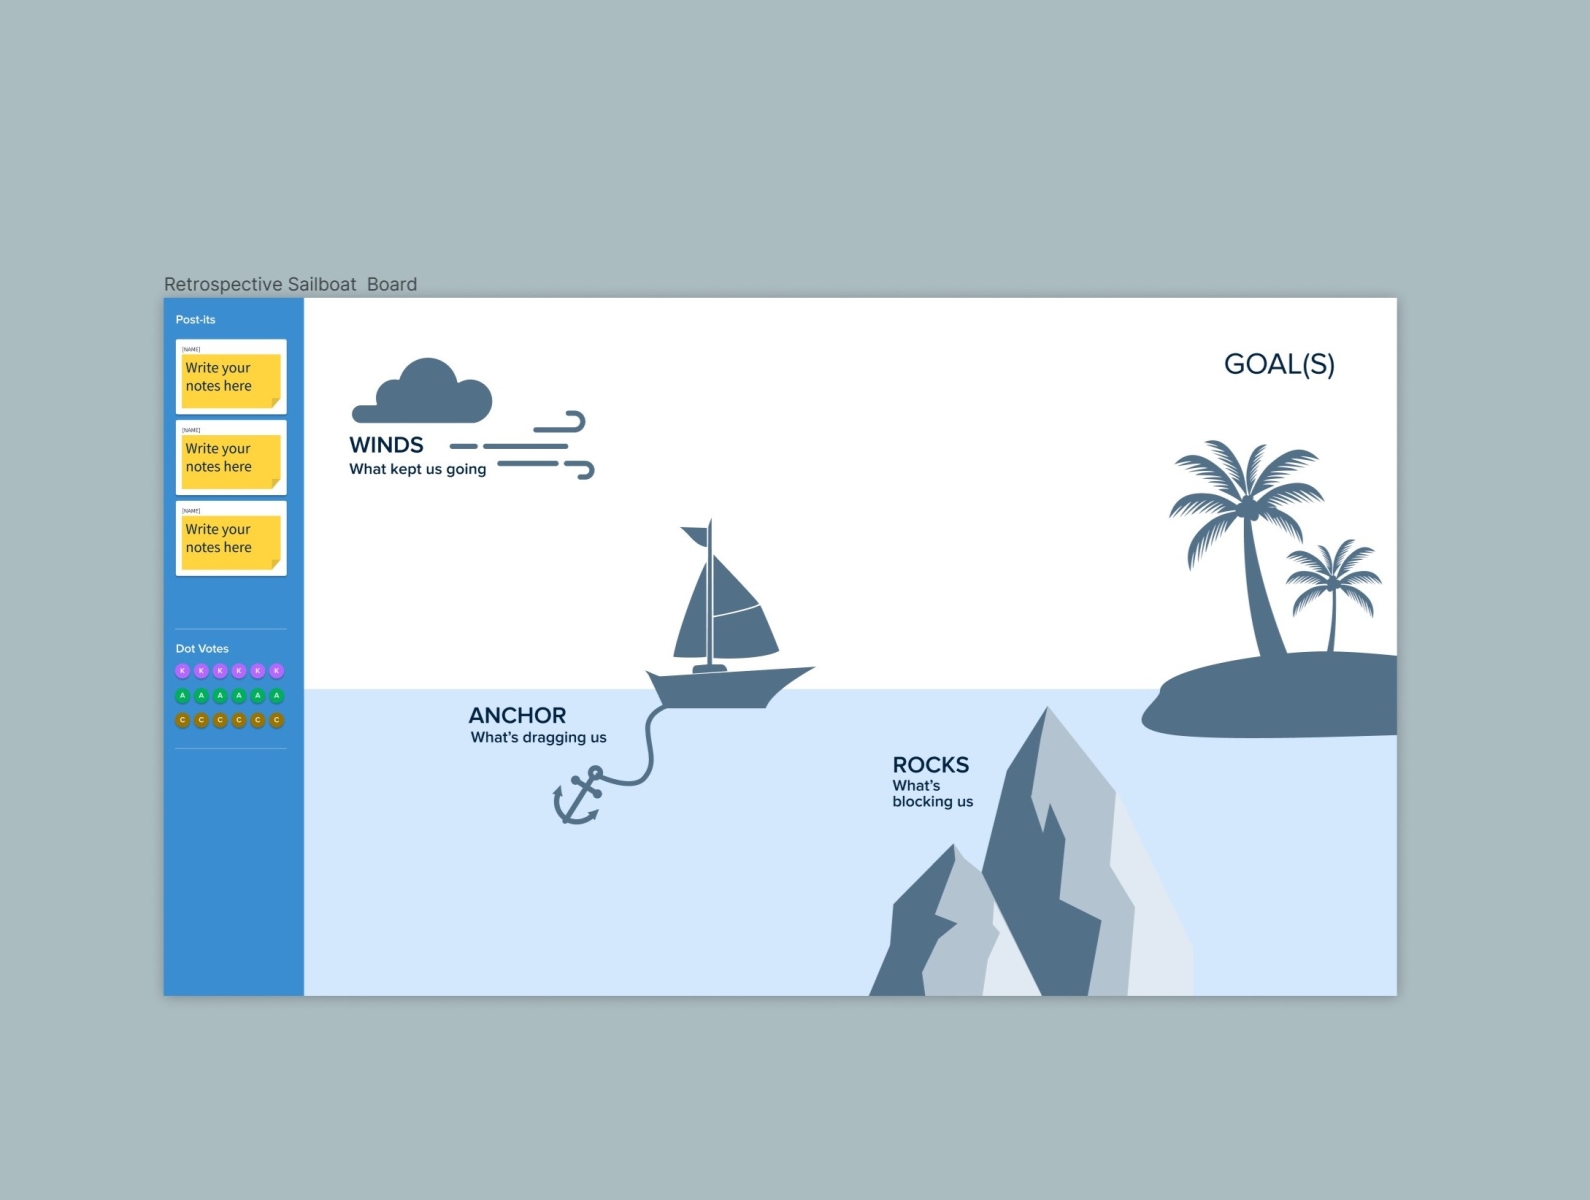 Sailboat Retrospective Figma Board by Teo Choong Ching on Dribbble